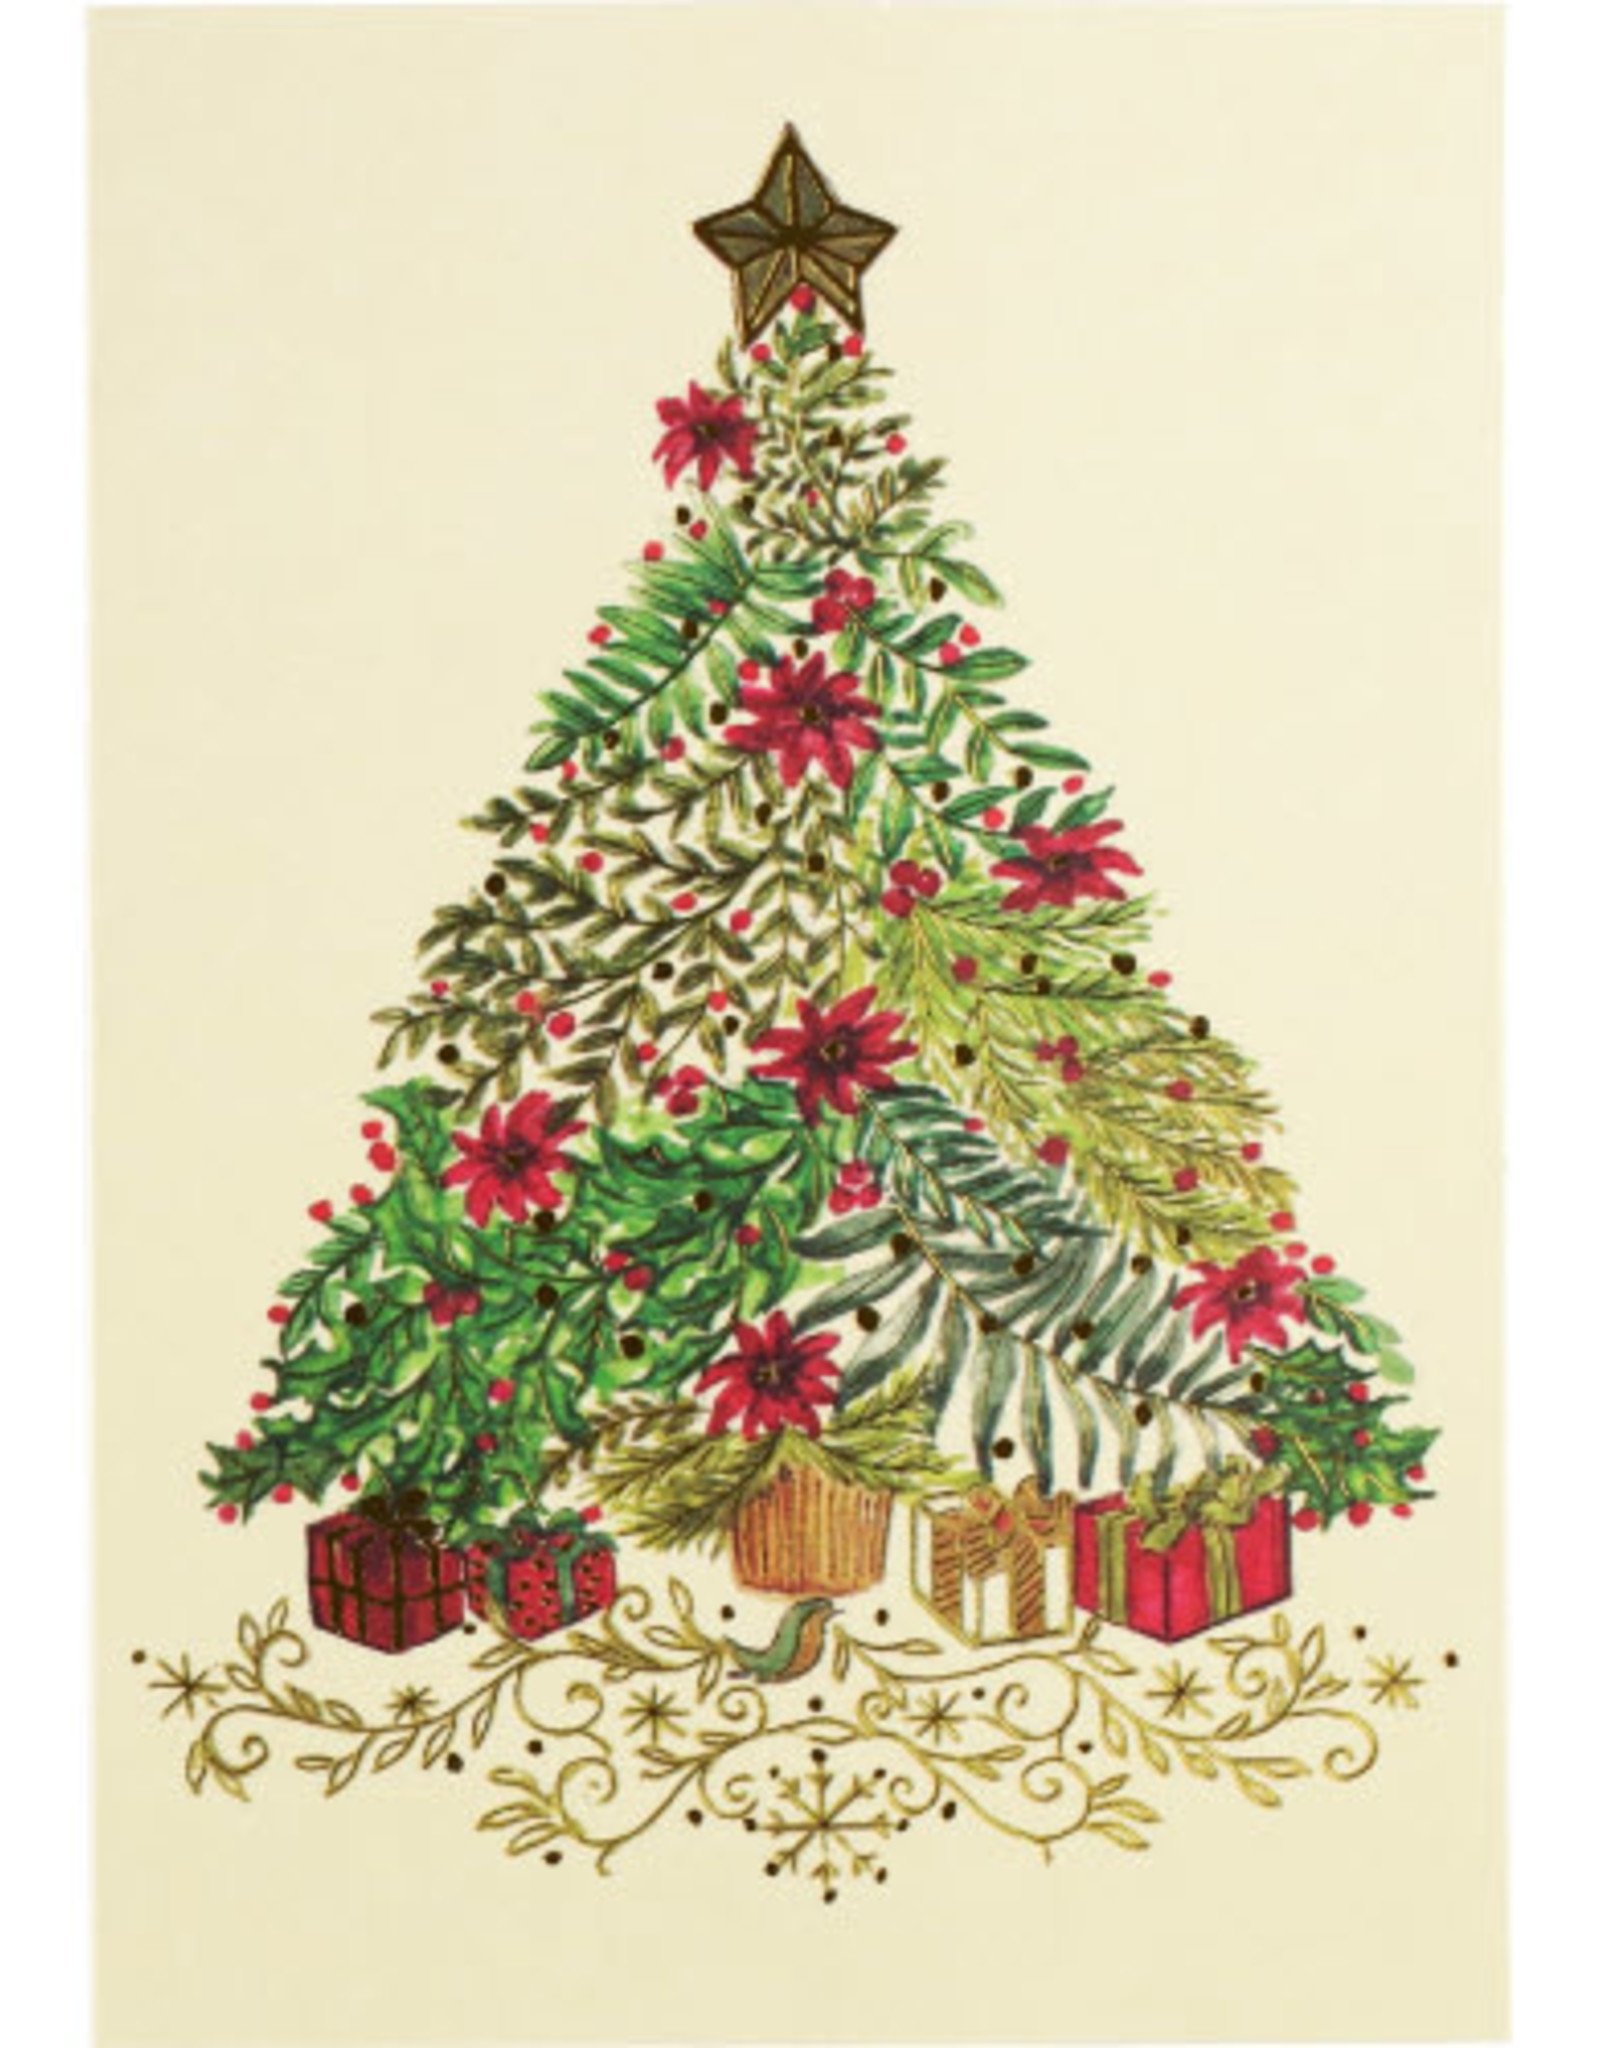 Peter Pauper Press Note Cards Holiday- Festive Evergreen